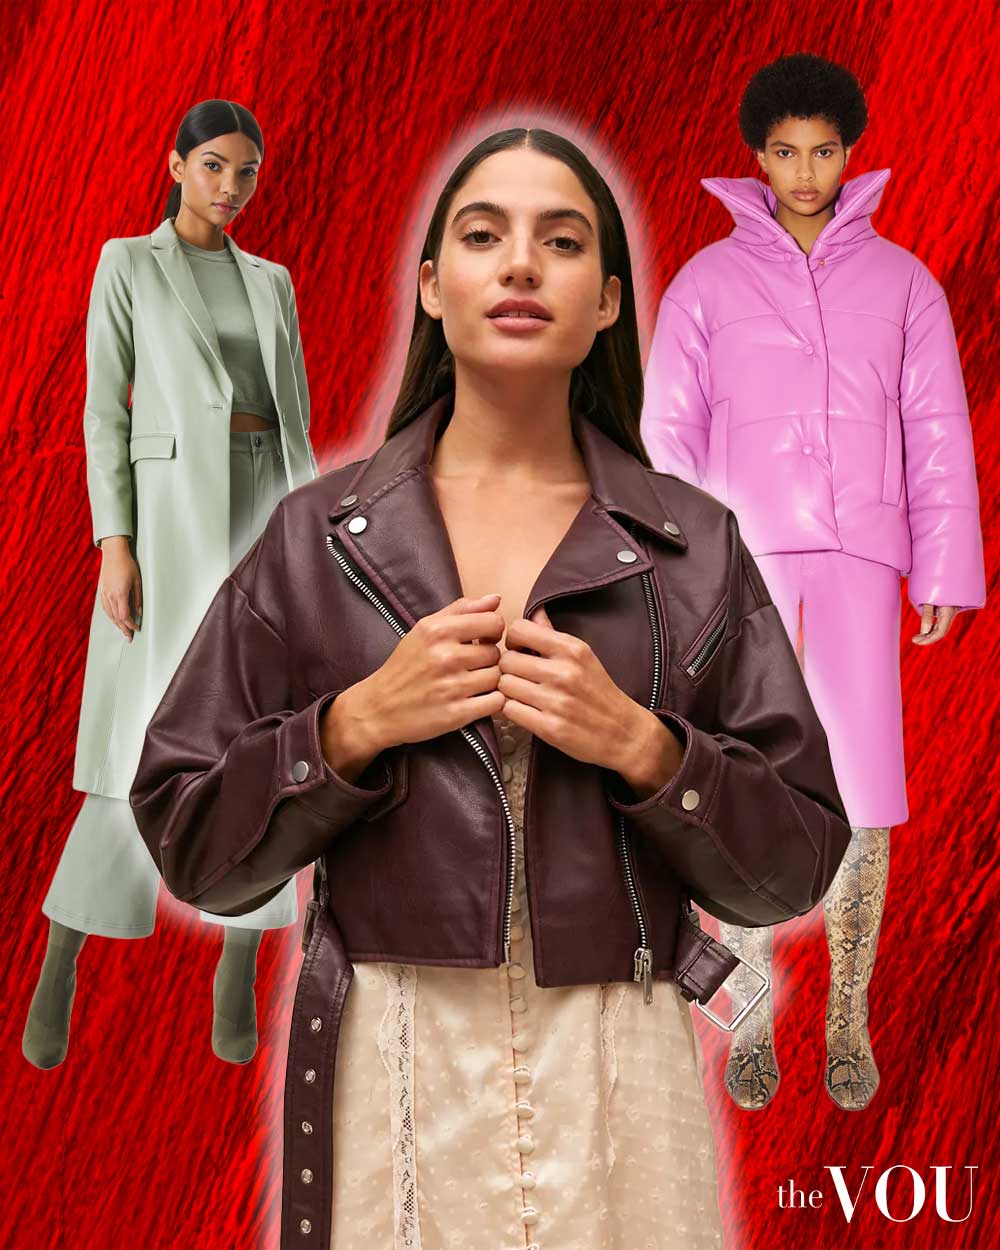 25 BEST Vegan Leather Jackets & Faux Leather Jackets - All Budgets 